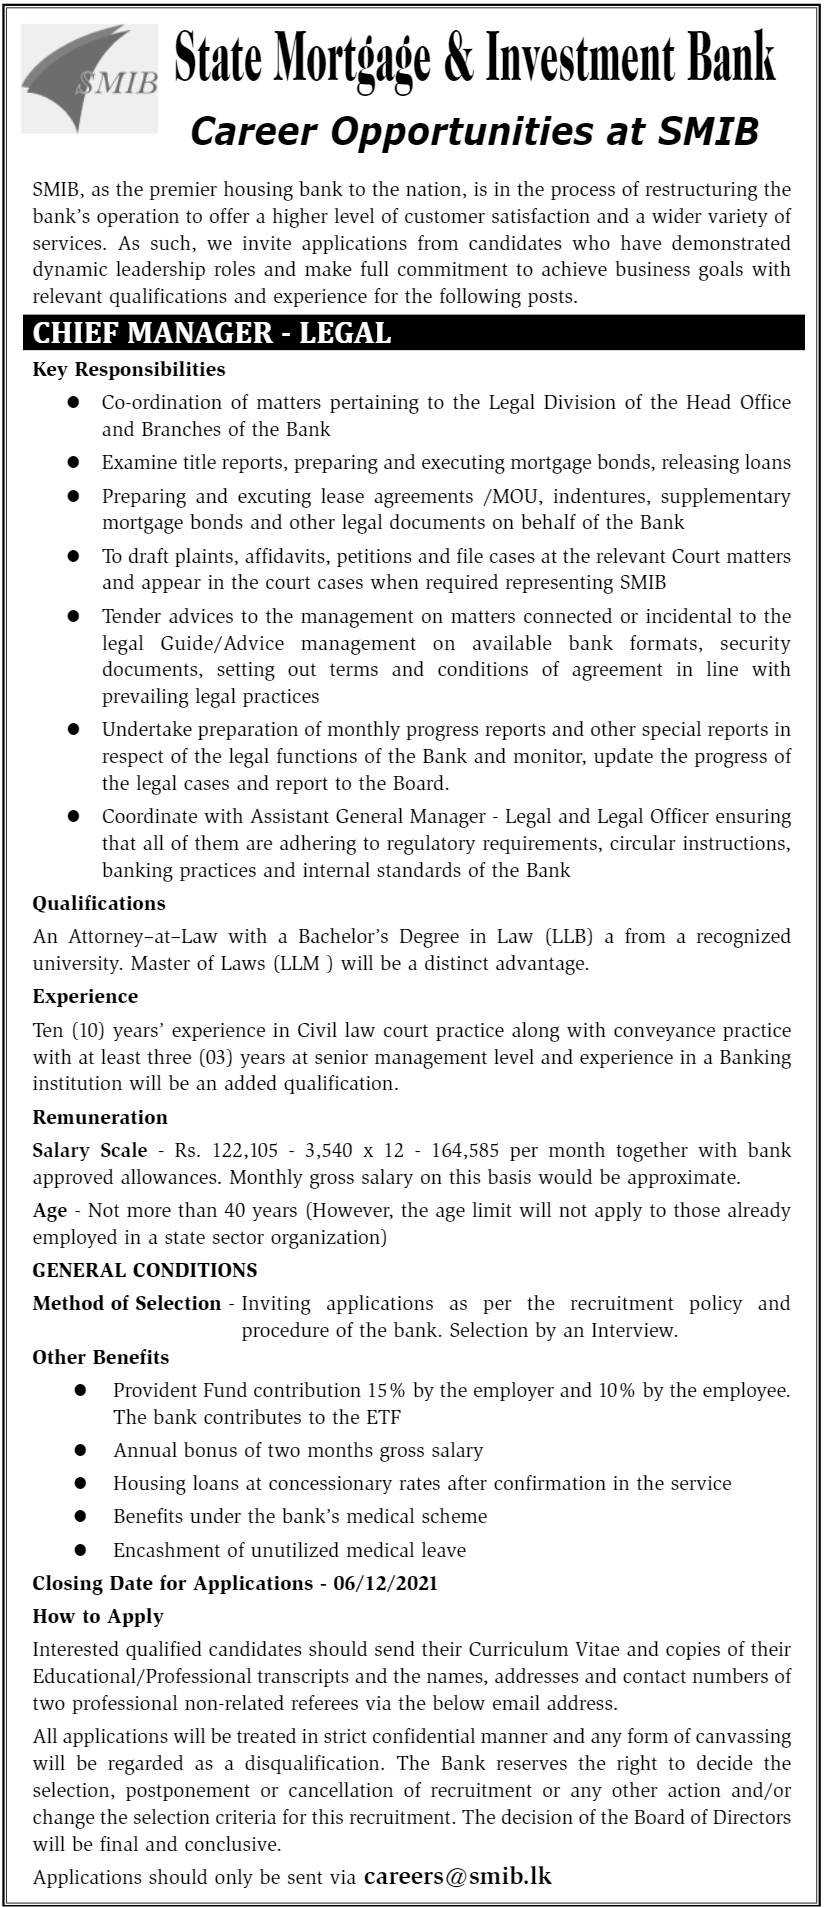 State Mortgage and Investment Bank Vacancies - Chief Manager (Legal)